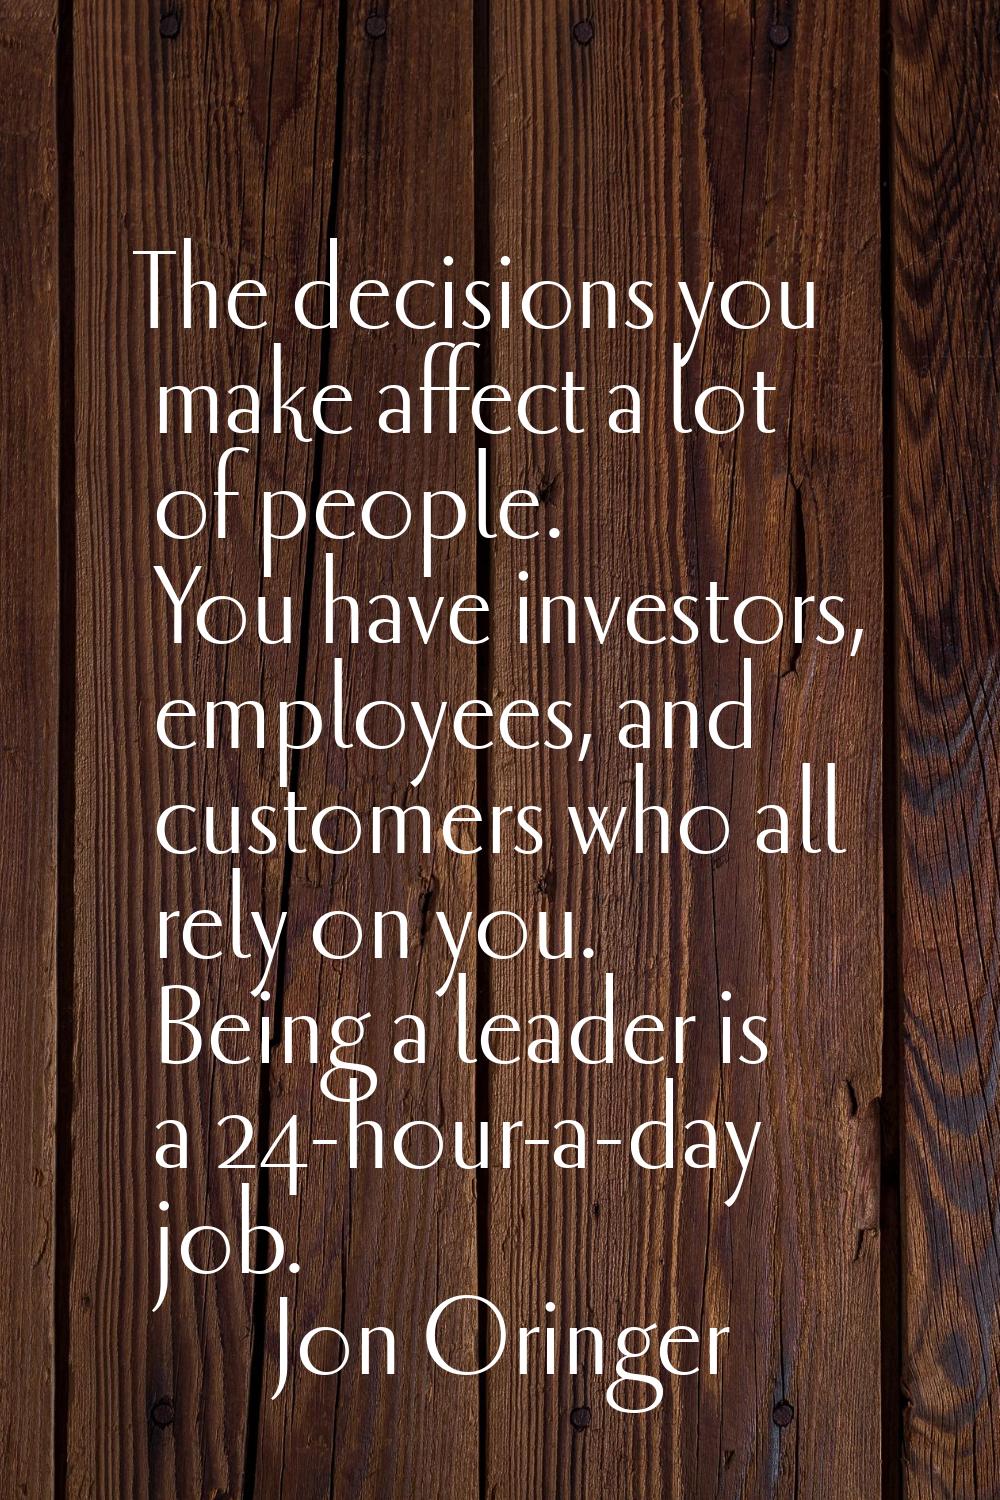 The decisions you make affect a lot of people. You have investors, employees, and customers who all